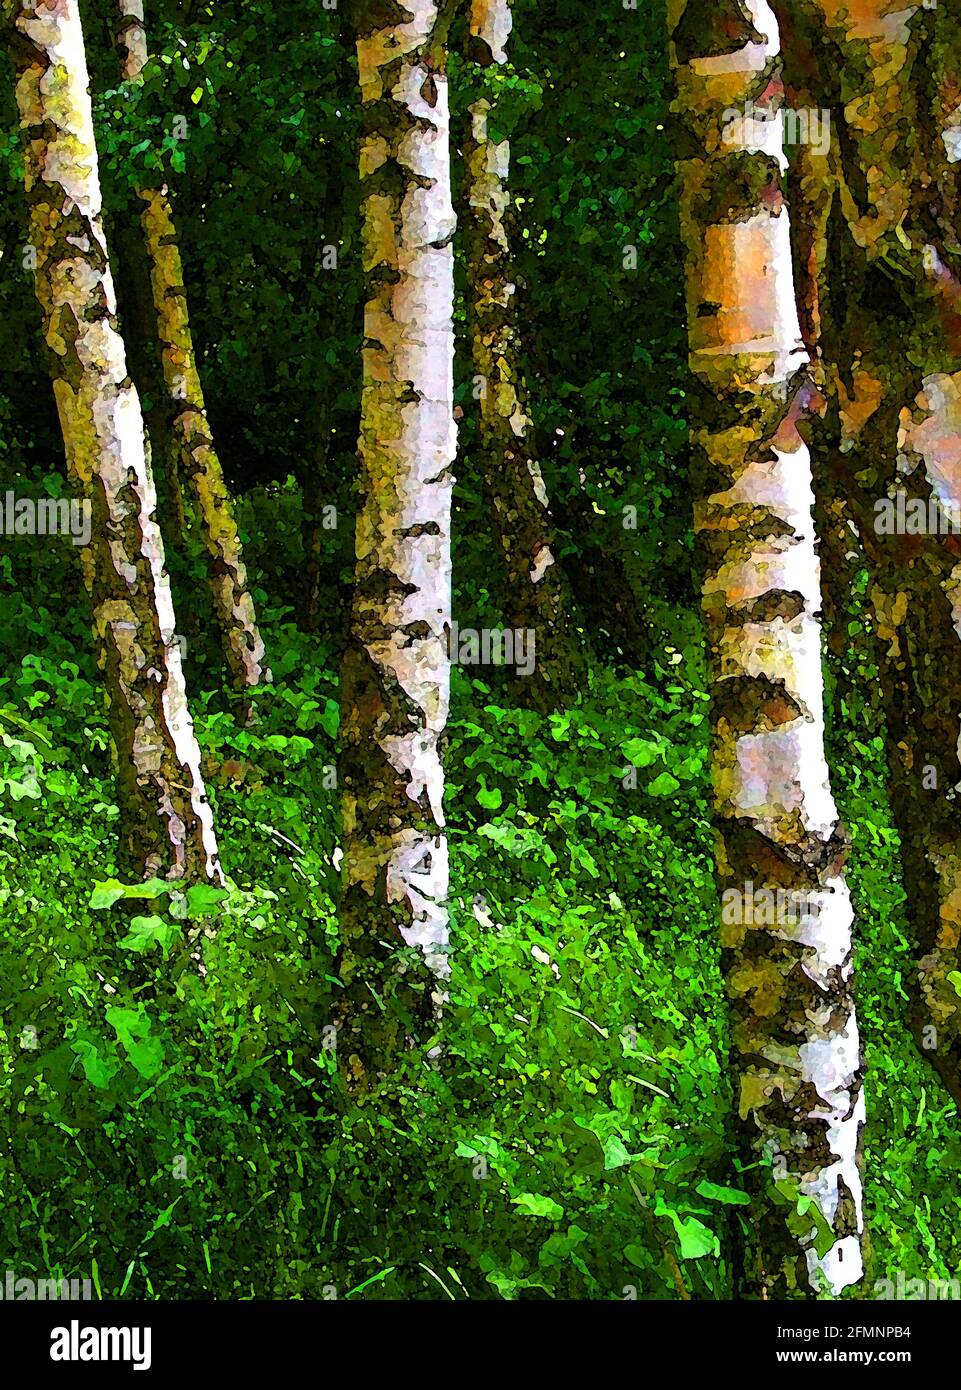 Silver Birch (Betula pendula) One of Forty-two Iconic Images of English Garden Flowers, Wildflowers and Rural Landscapes. Stock Photo